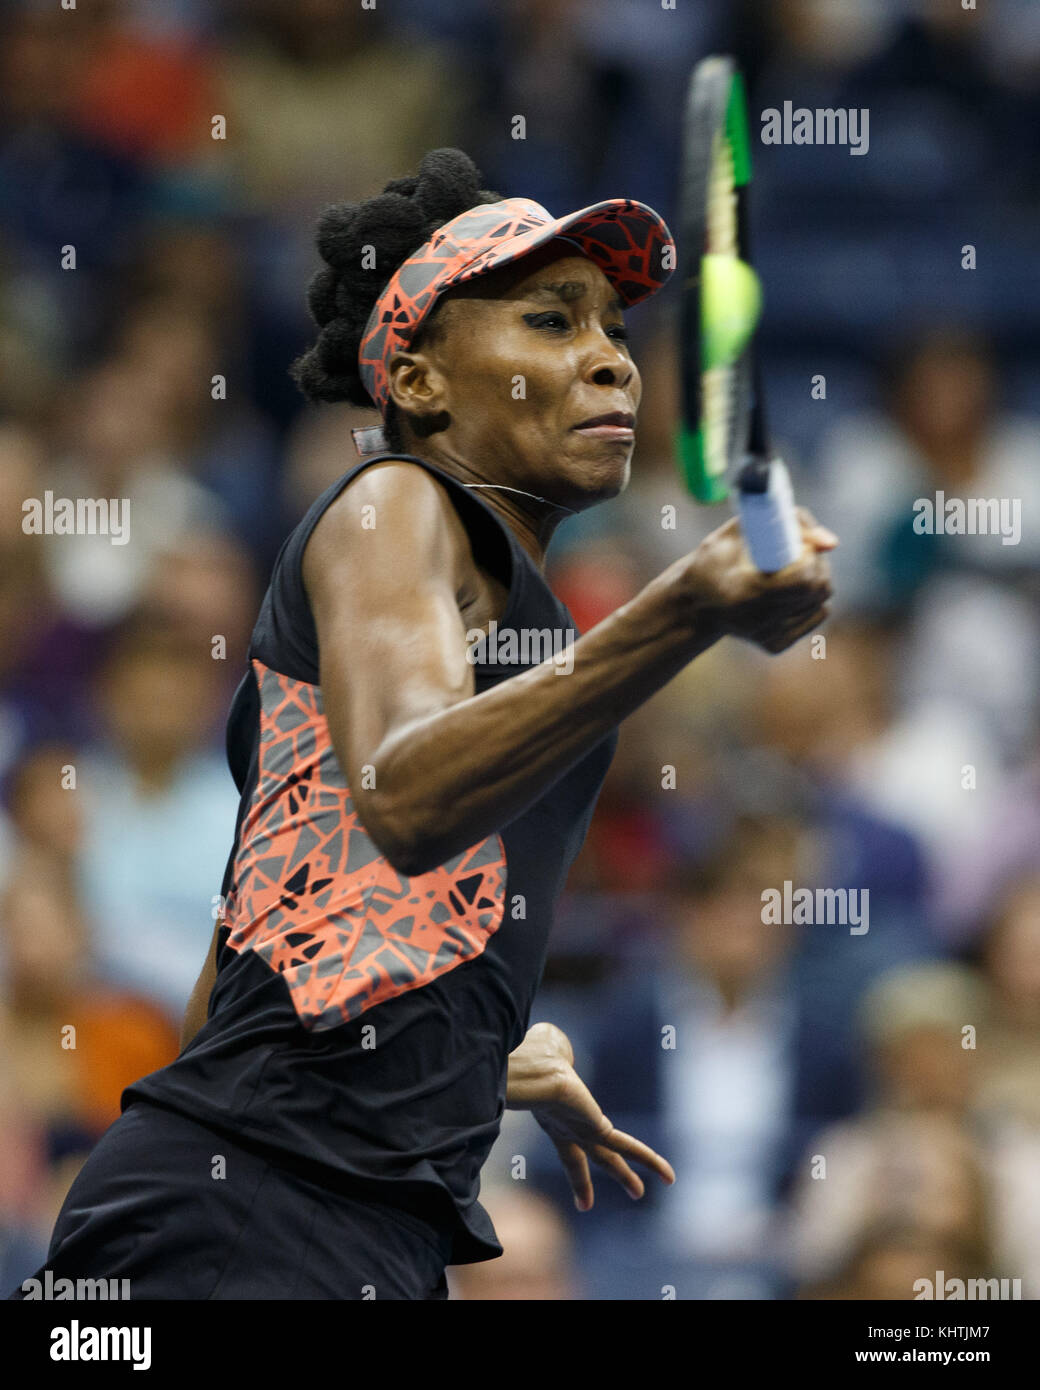 American tennis player VENUS WILLIAMS (USA) hitting a forehand volley during women's singles match at US Open 2017 Tennis Championship, New York City, Stock Photo